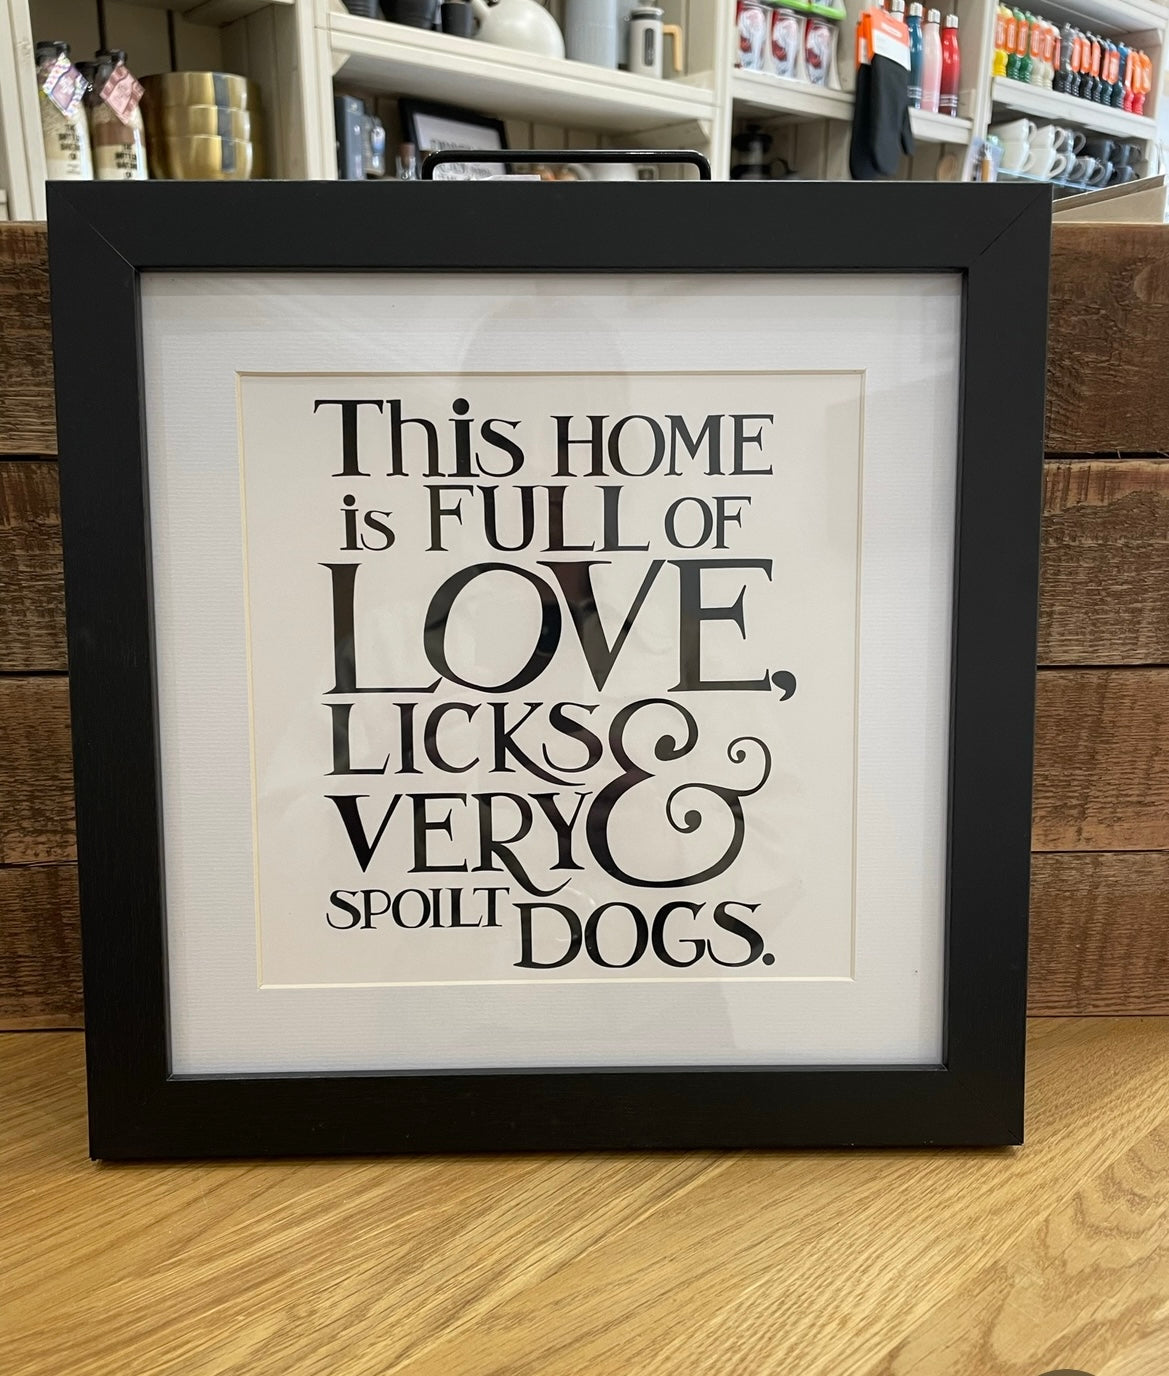 Framed Phrase Prints 25cm x 25cm - This home is full of Love, Licks & a very spoilt Dogs